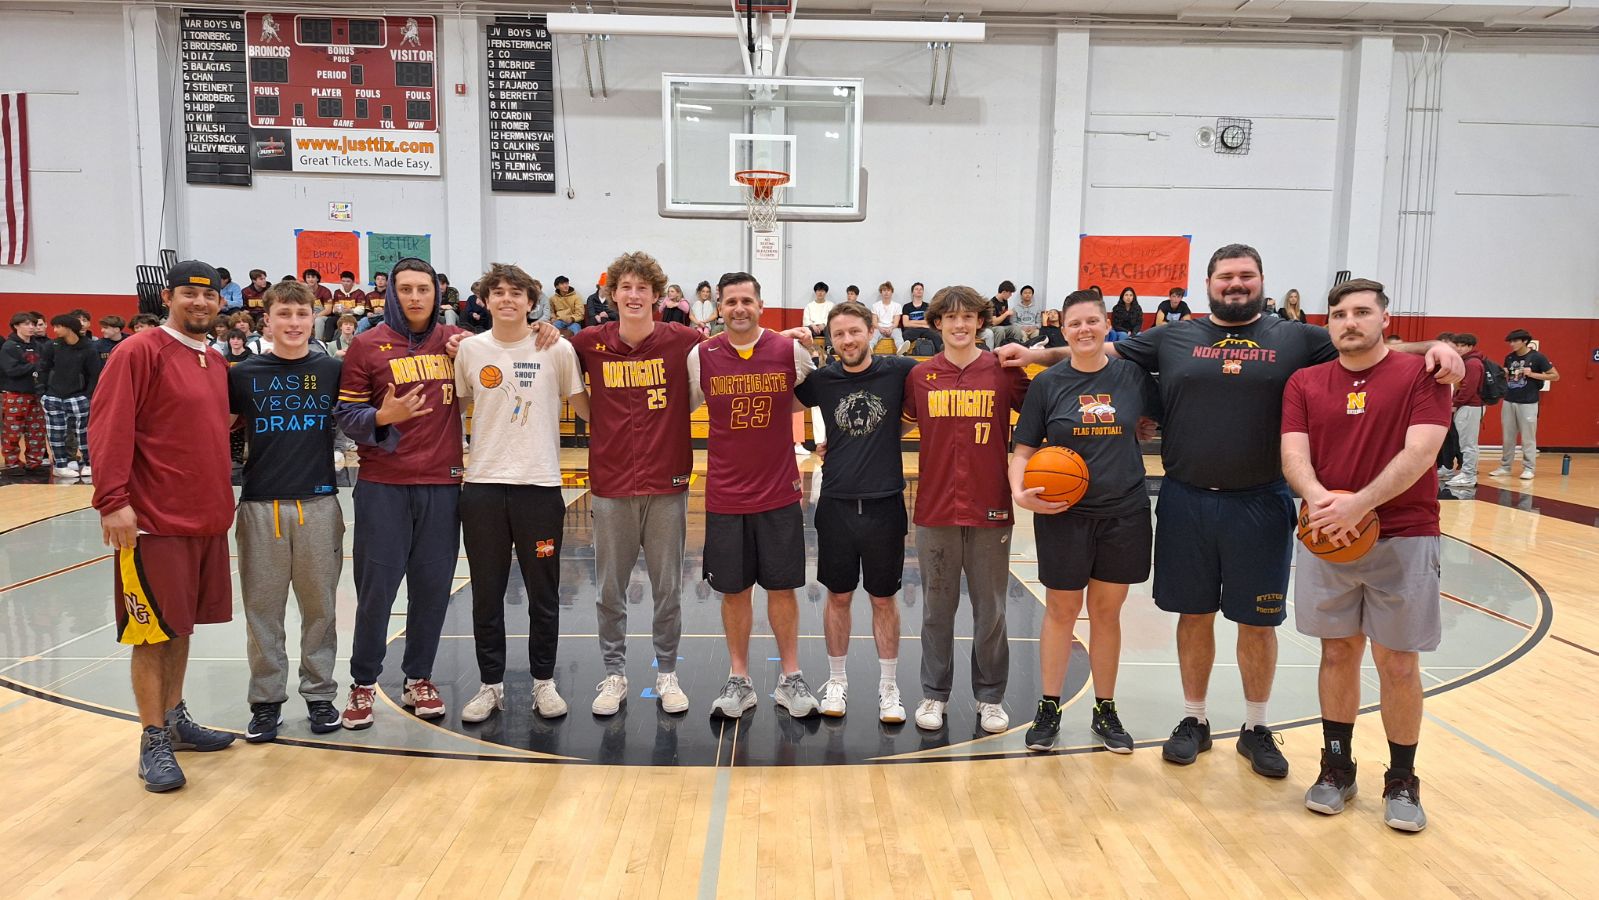 Northgate March Madness Basketball Tournament Thrills Students and Spectators